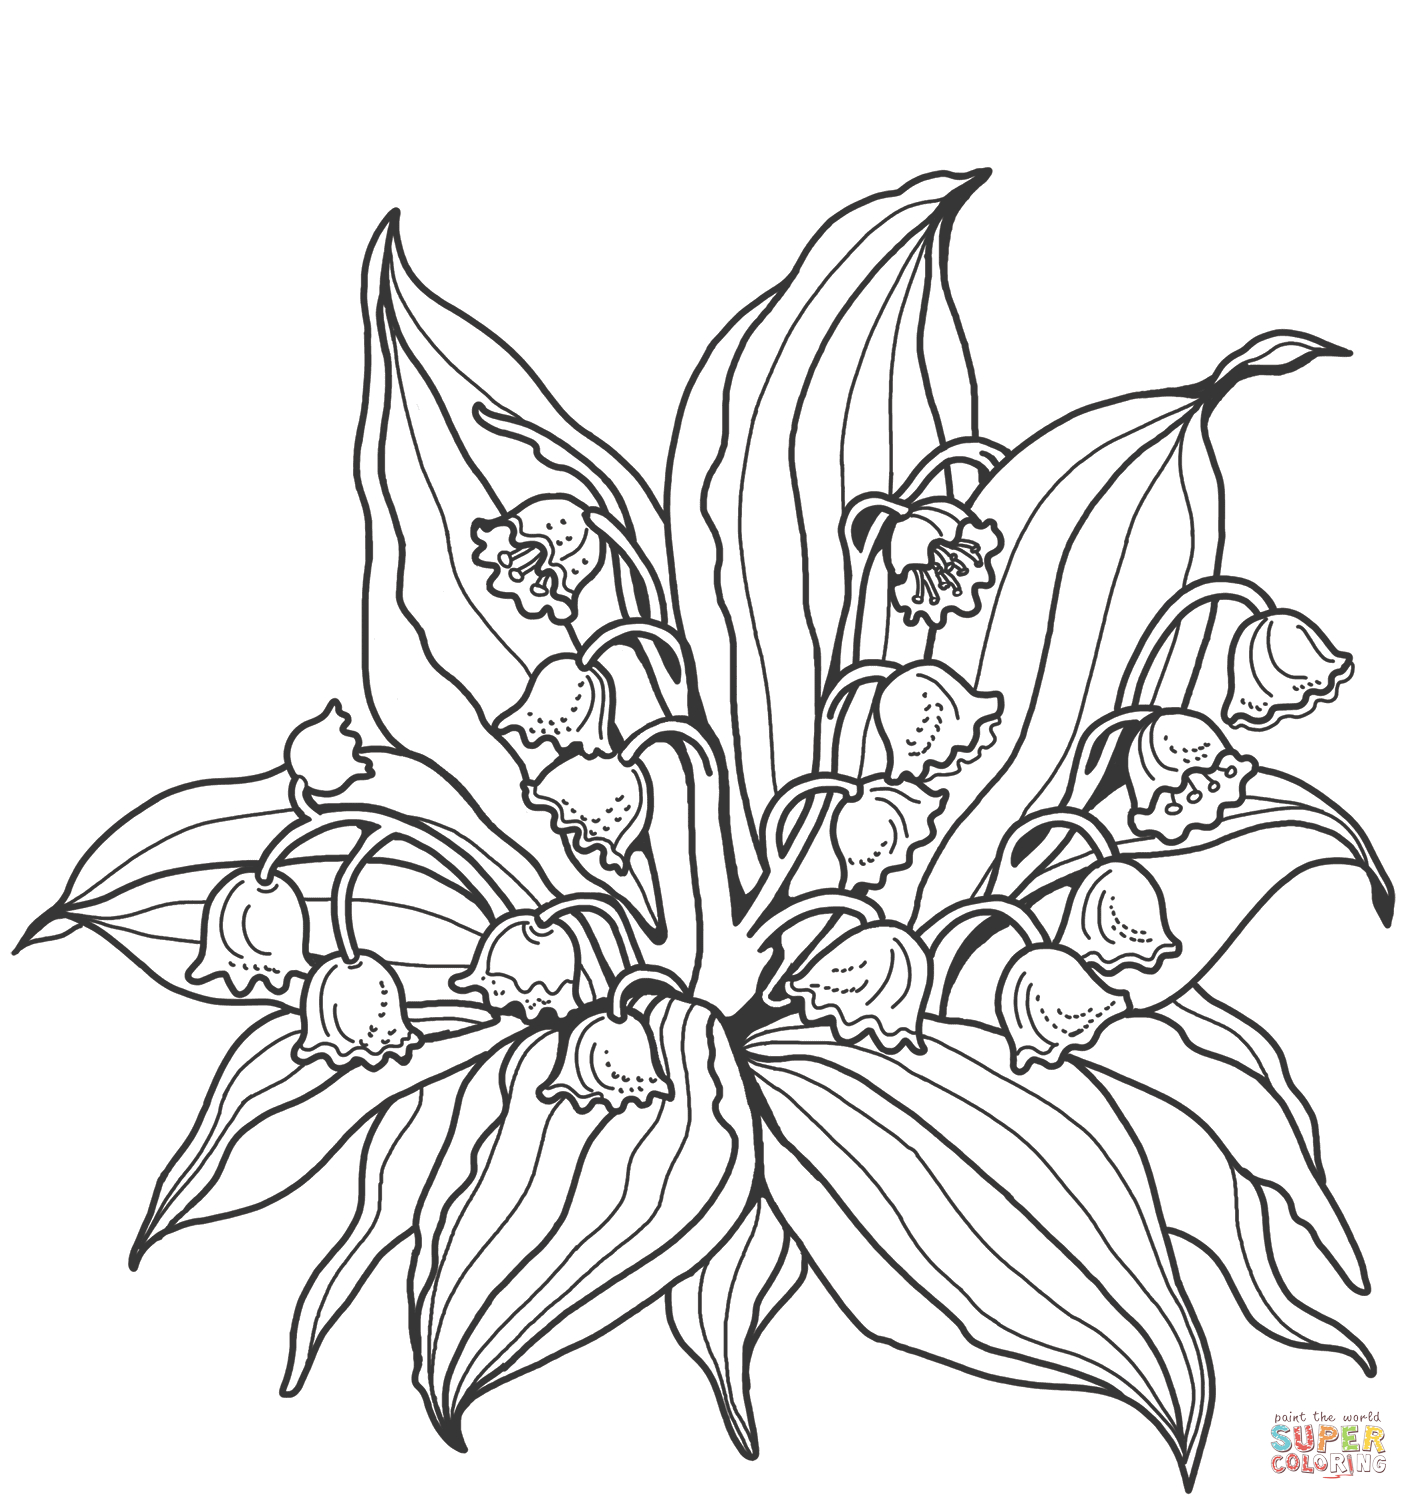 Lily Of The Valley Coloring Page Lily Of The Valley Coloring Page Free Printable Coloring Pages